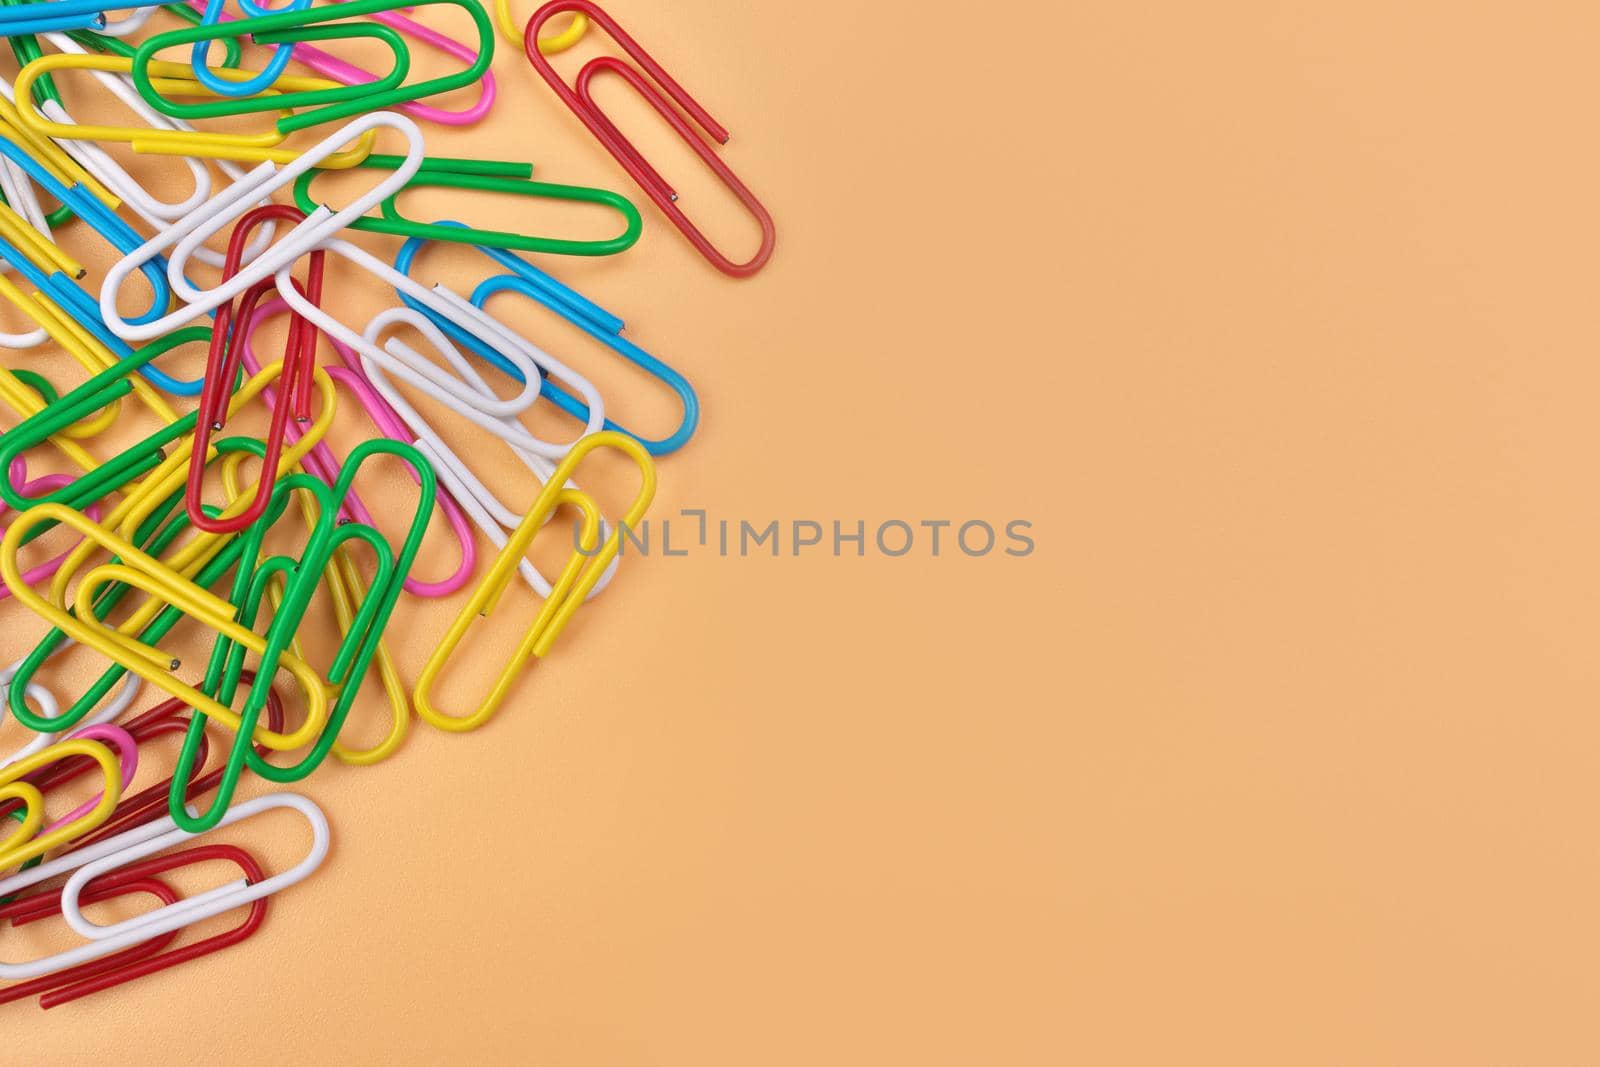 Multicolored Paperclips Isolated on a Cheerful Orange Beige Background with Copy Space on Right. High quality photo